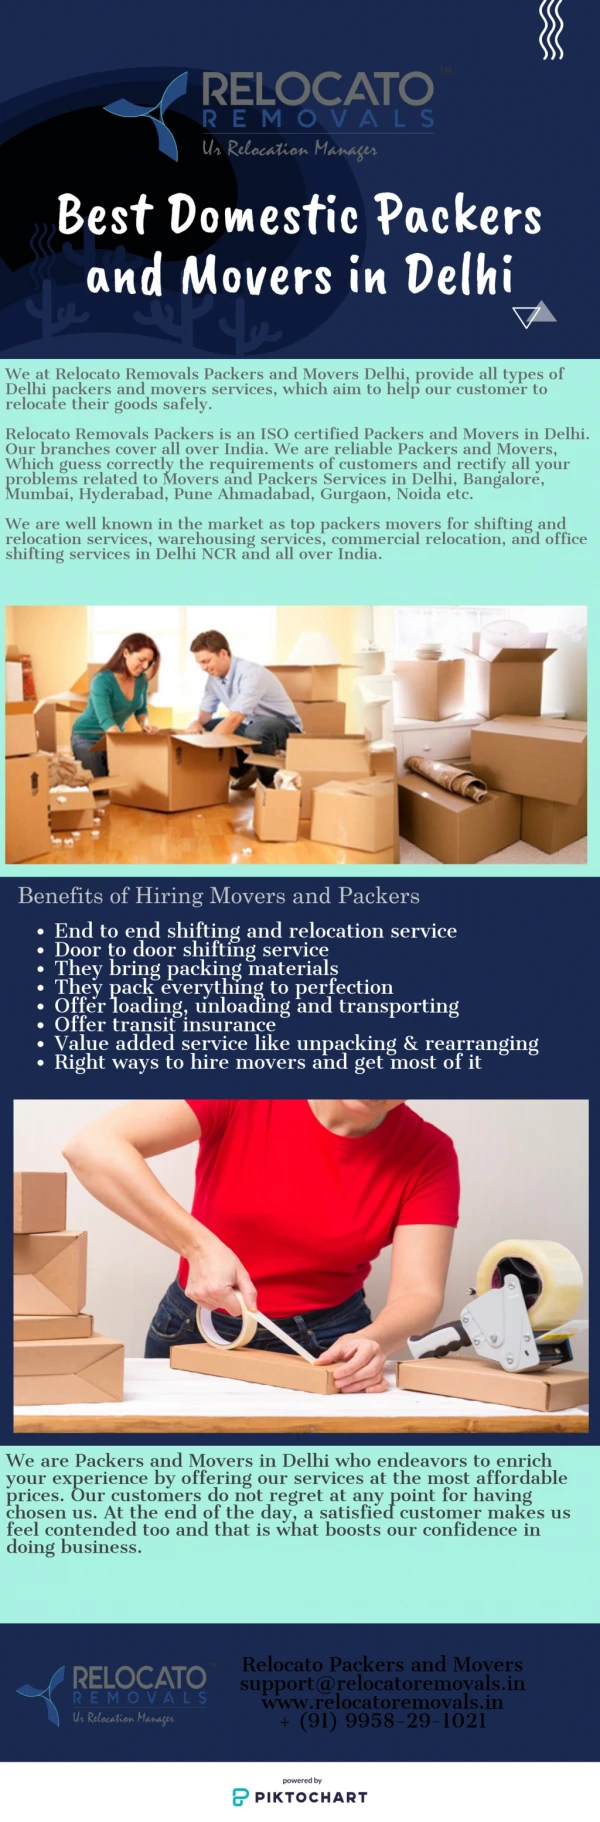 Best Domestic Packers and Movers in Delhi